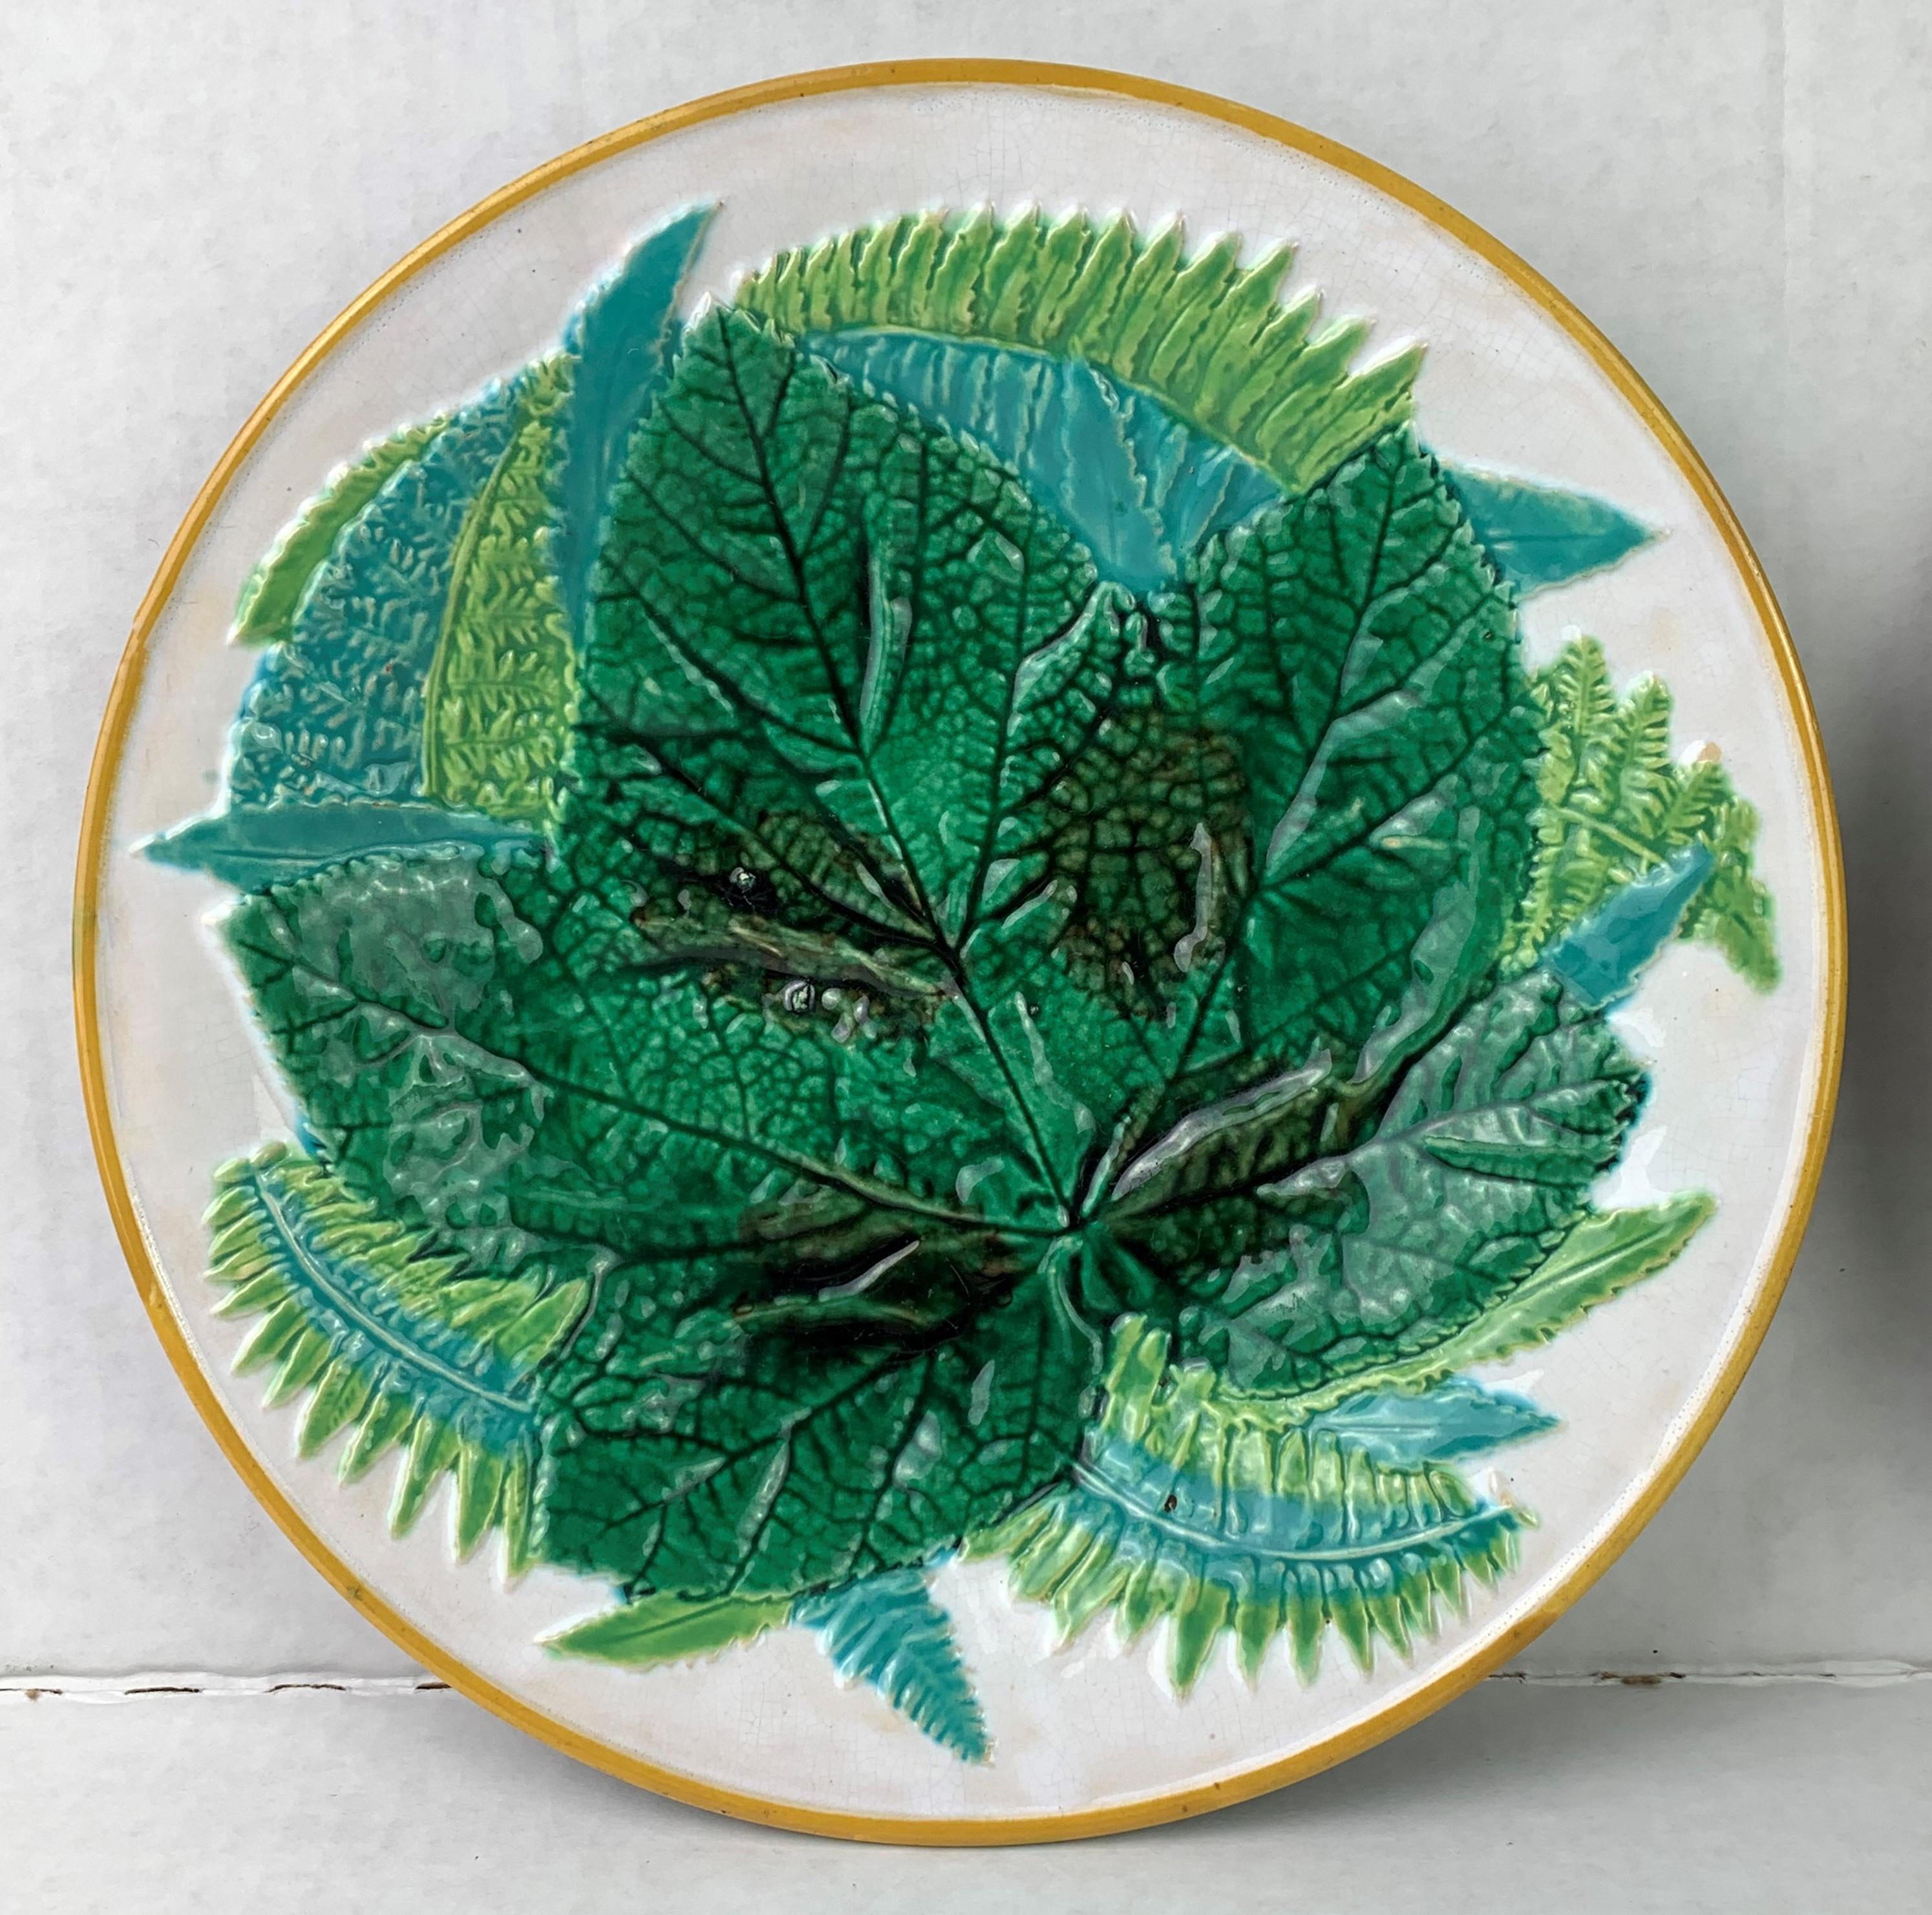 Pair (2) George Jones Majolica Leaf and Ferns Plates on a white ground, English, circa 1875, naturalistically molded with a central motif of a maple leaf surrounded by and ferns, glazed in varying shades of green and turquoise blue. Both with 'GJ'